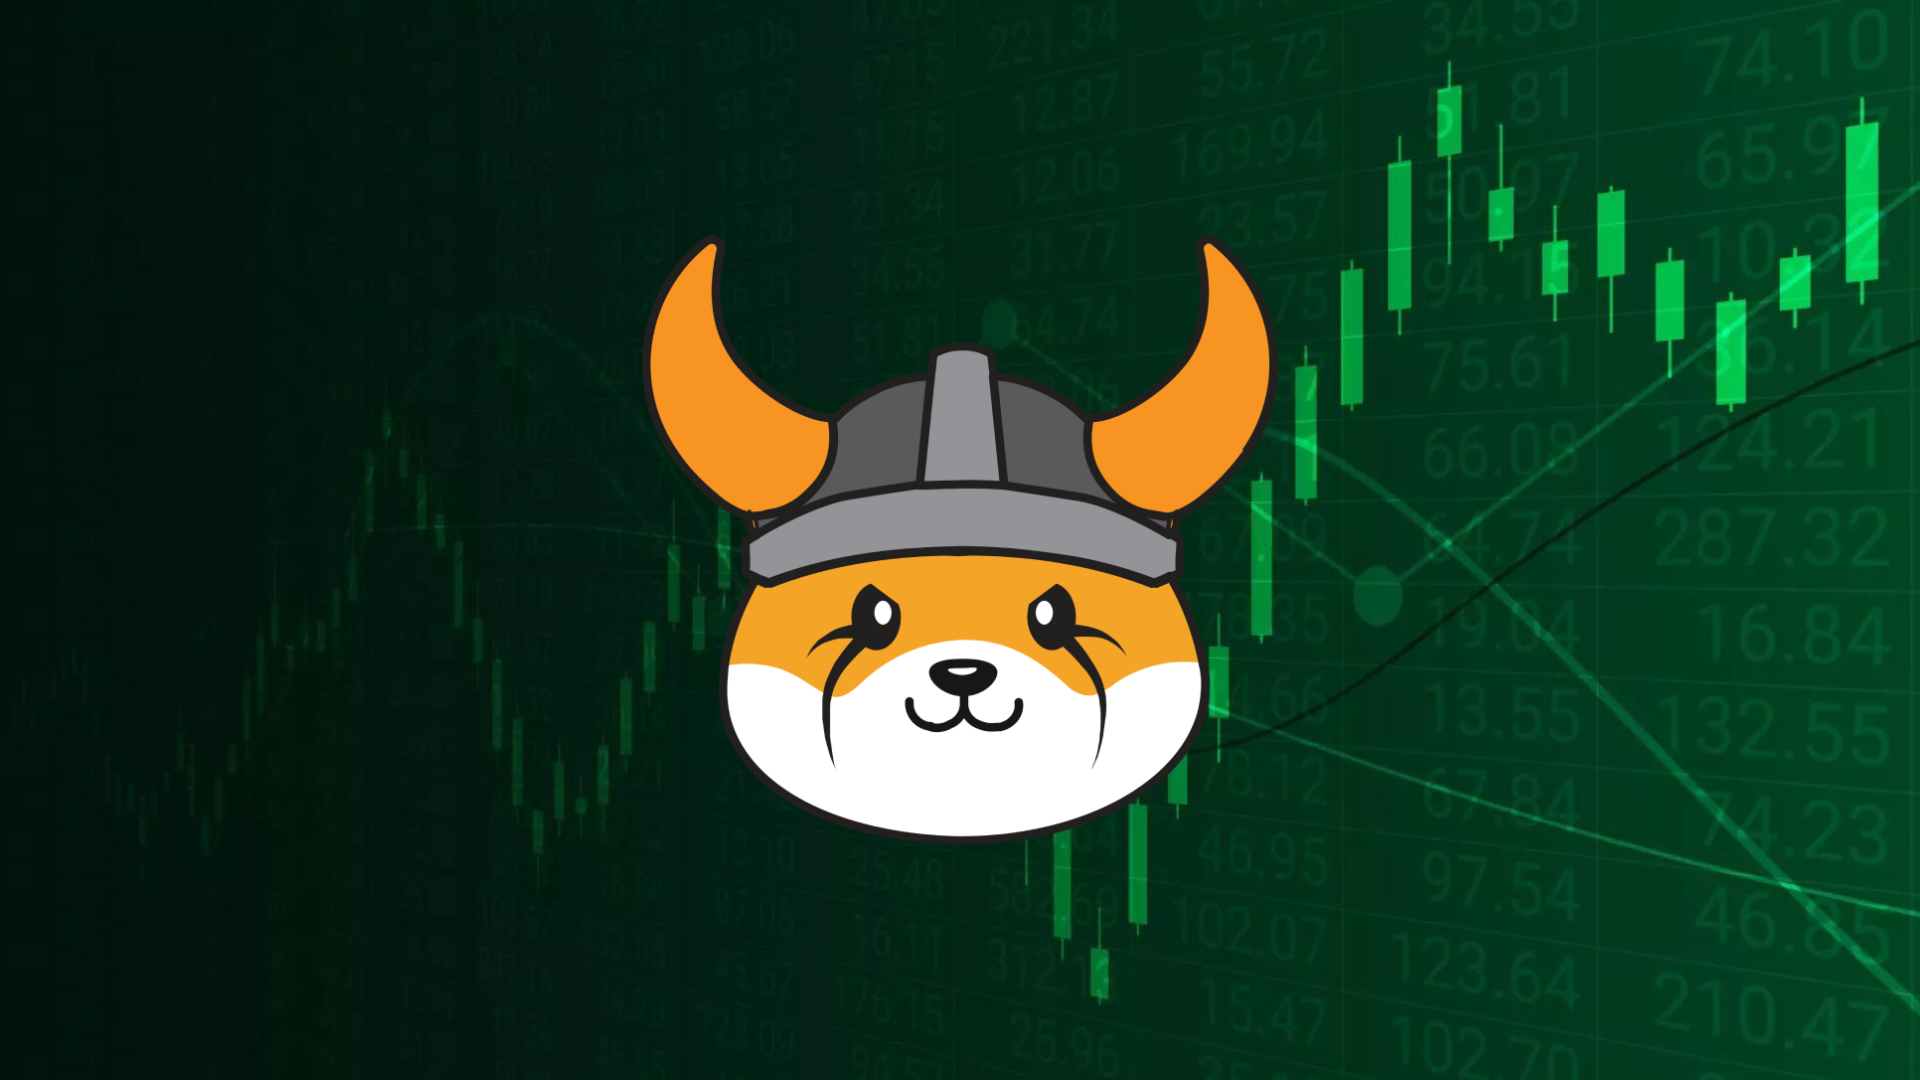 FLOKI Price Prediction: FLOKI Plunges 10% As Experts Say Consider This Pioneering VR/AR Crypto That’s Soared Past $1 Million